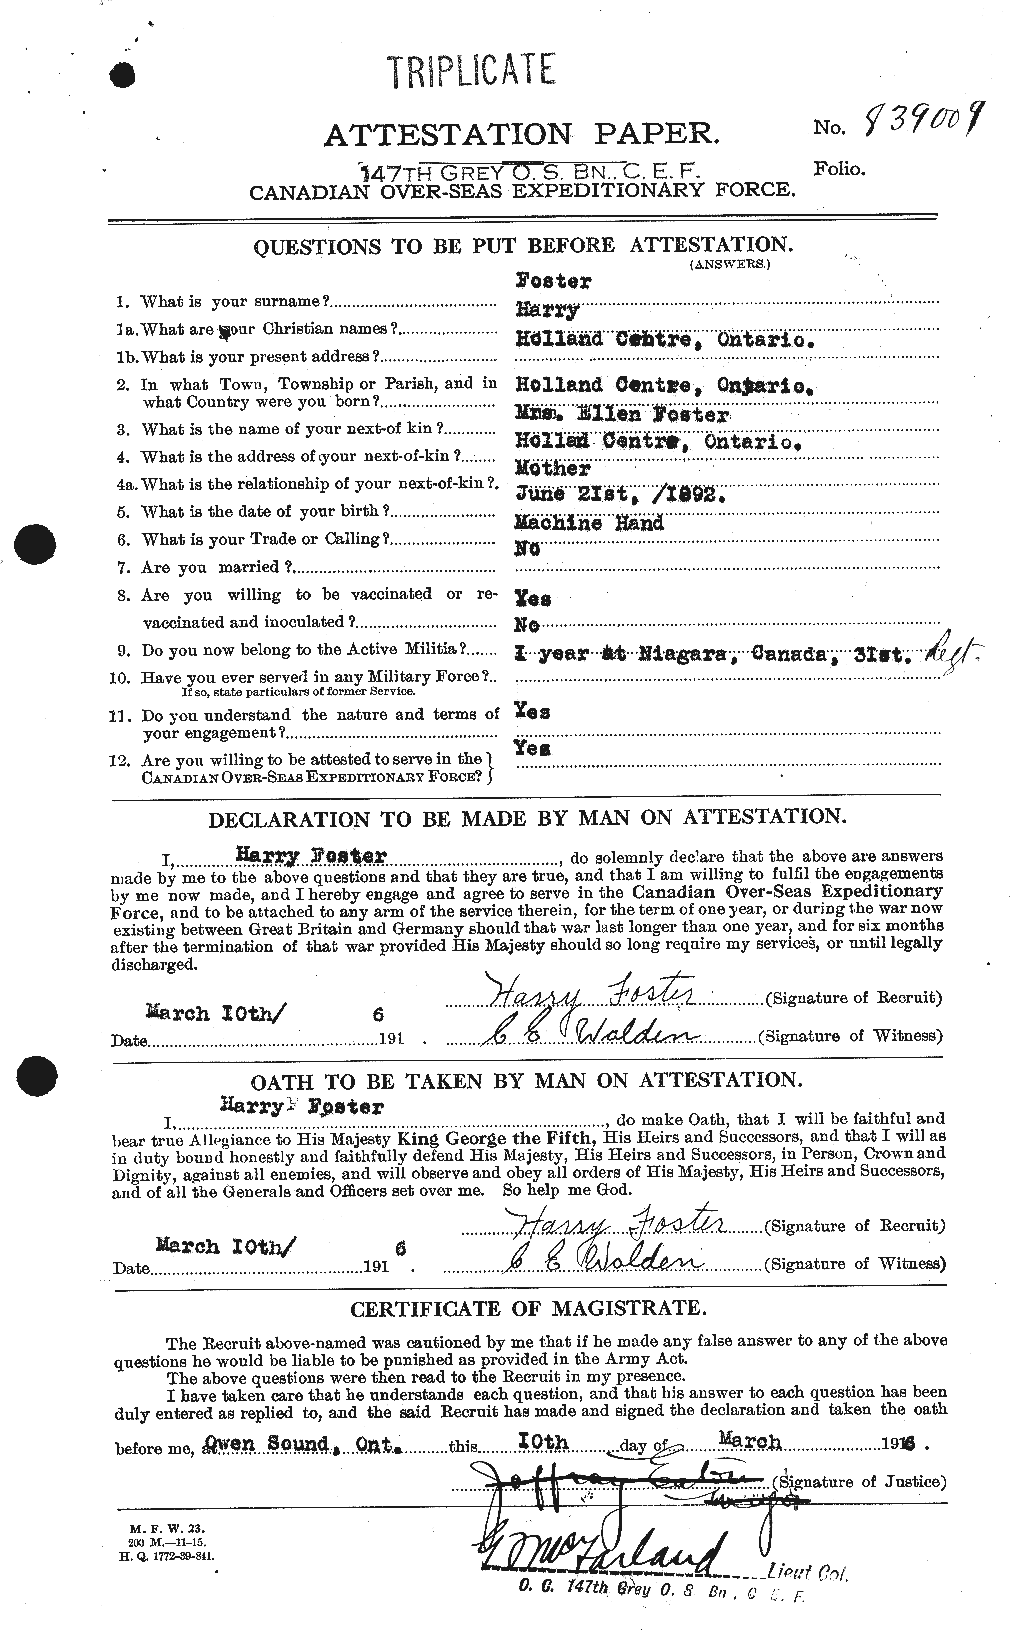 Personnel Records of the First World War - CEF 330740a